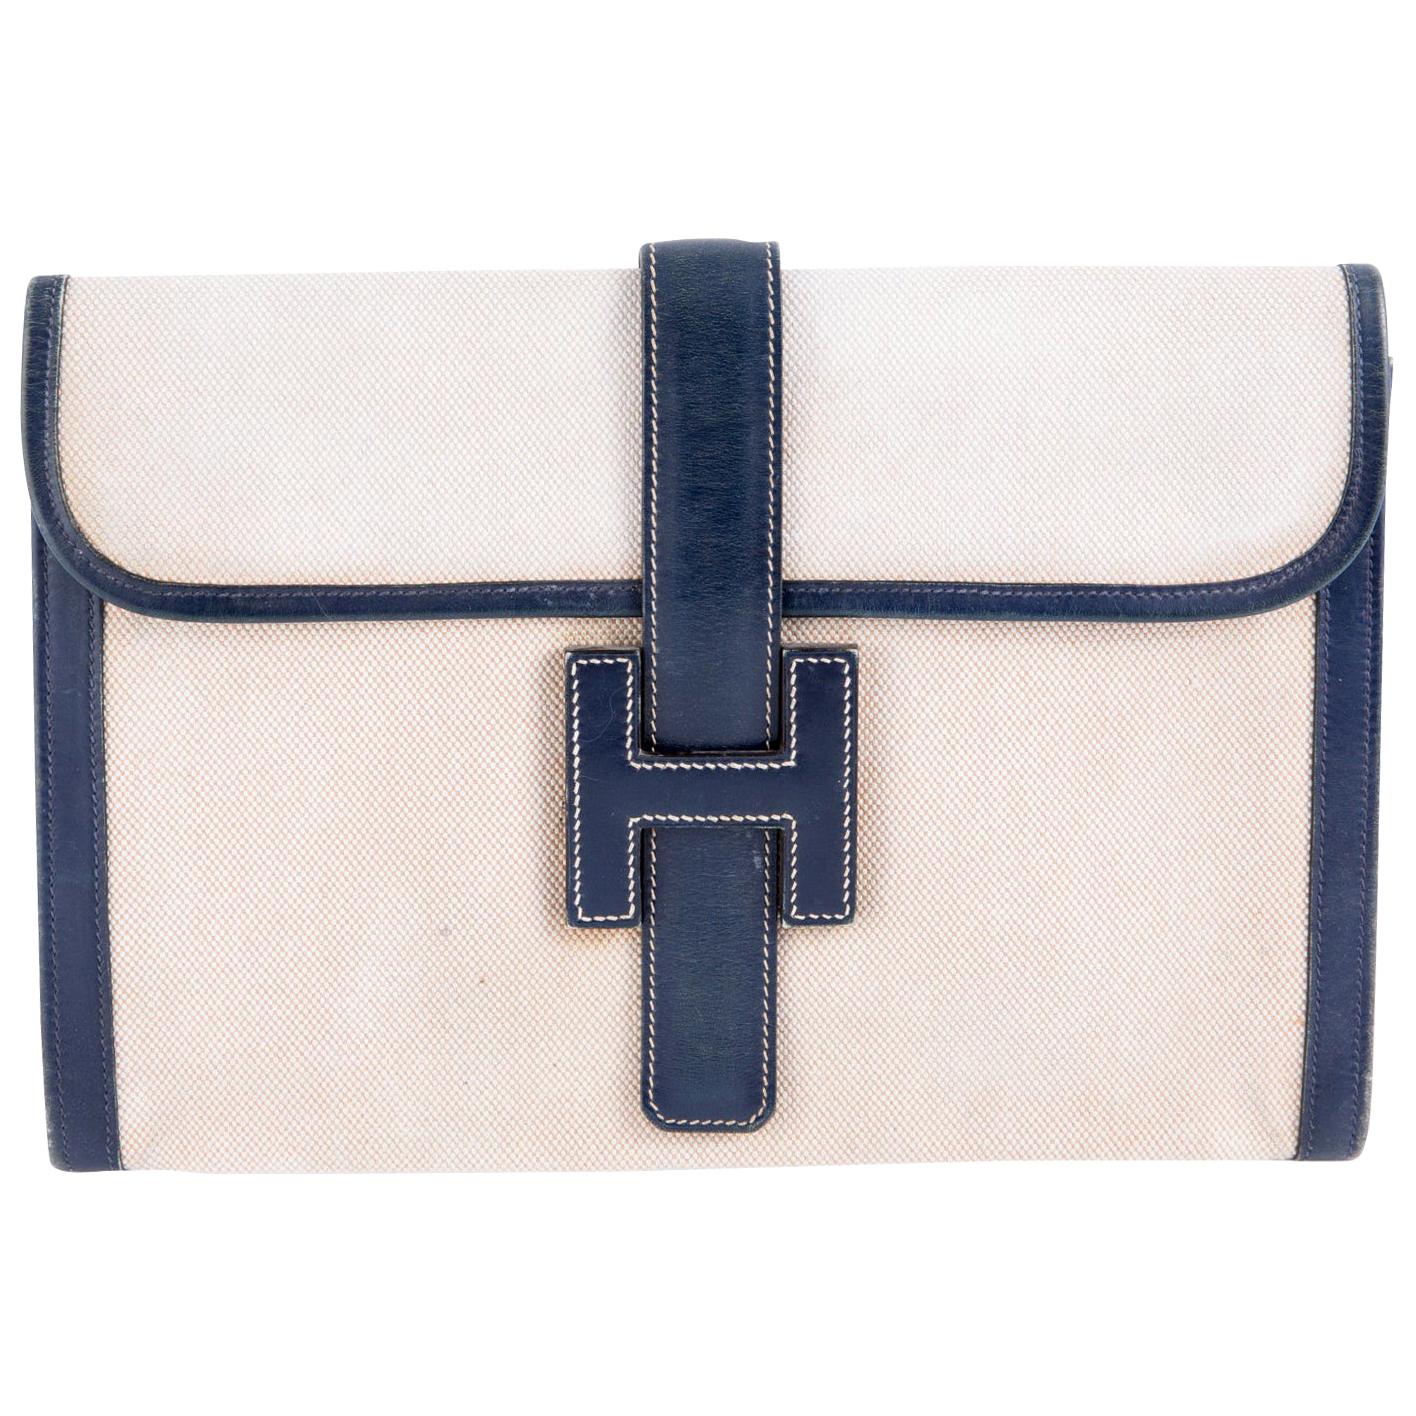 Hermes Jige Clutch Ivory Canvas and Navy Box Leather 